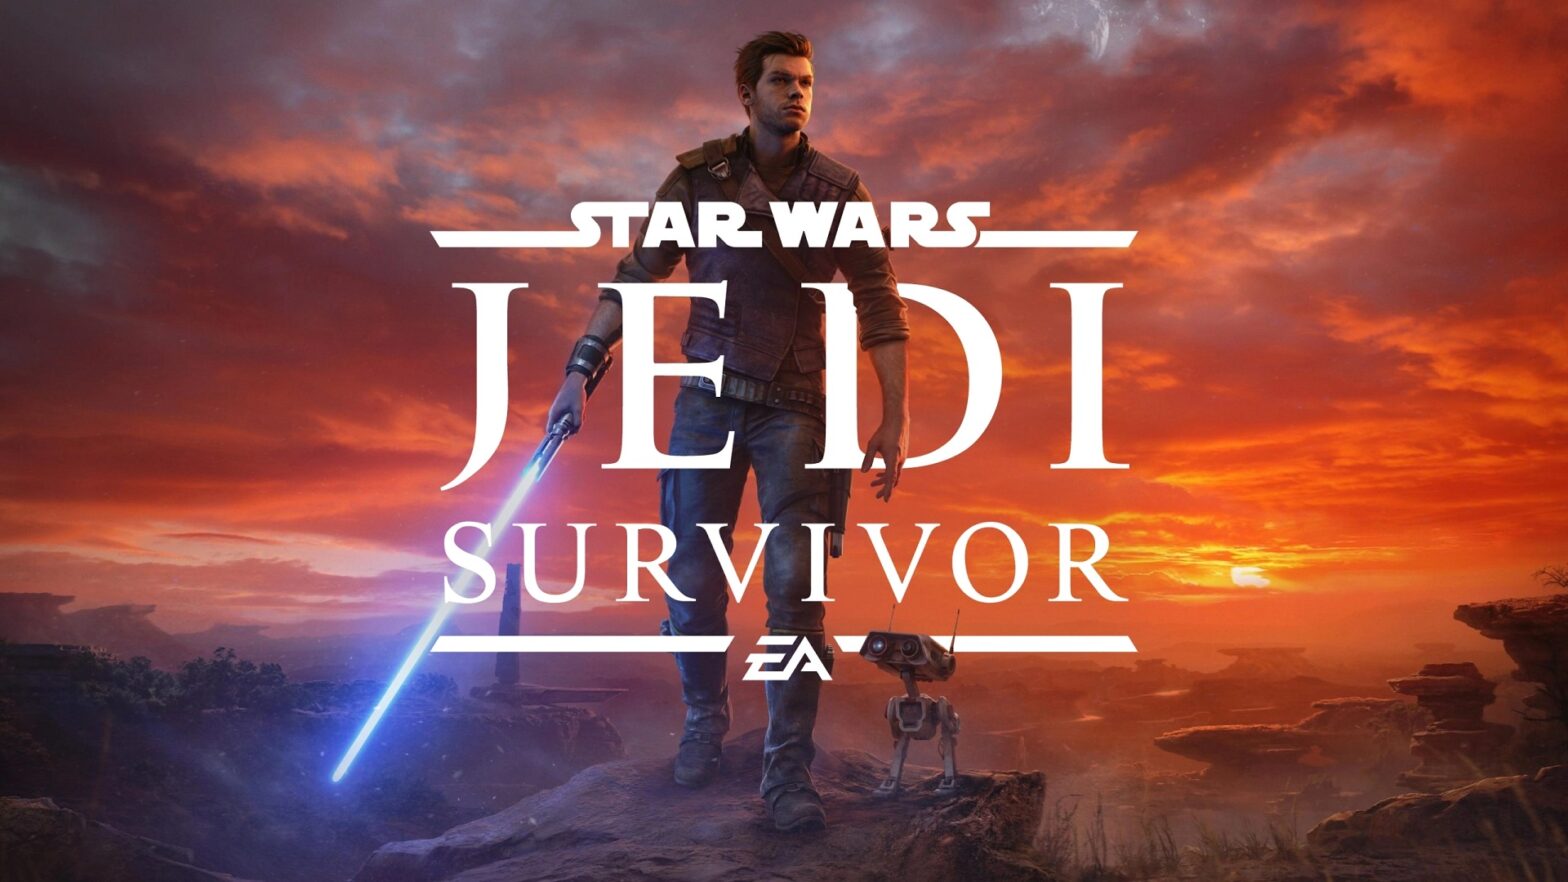 Star Wars: Jedi Survivor has become the most popular game on PS5 in April